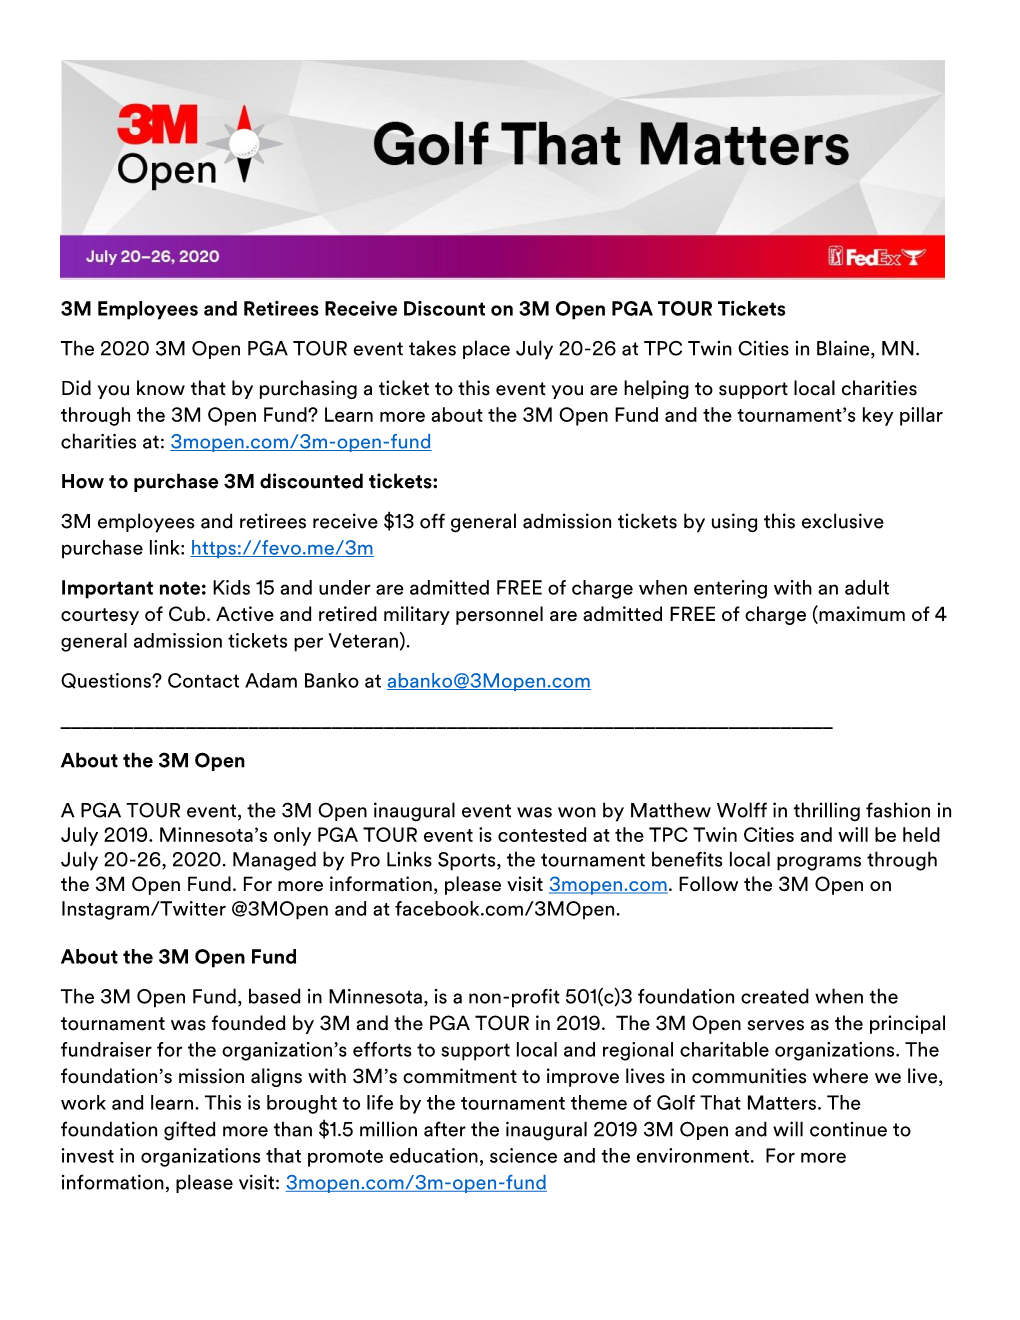 3M Open PGA TOUR Tickets the 2020 3M Open PGA TOUR Event Takes Place July 20-26 at TPC Twin Cities in Blaine, MN